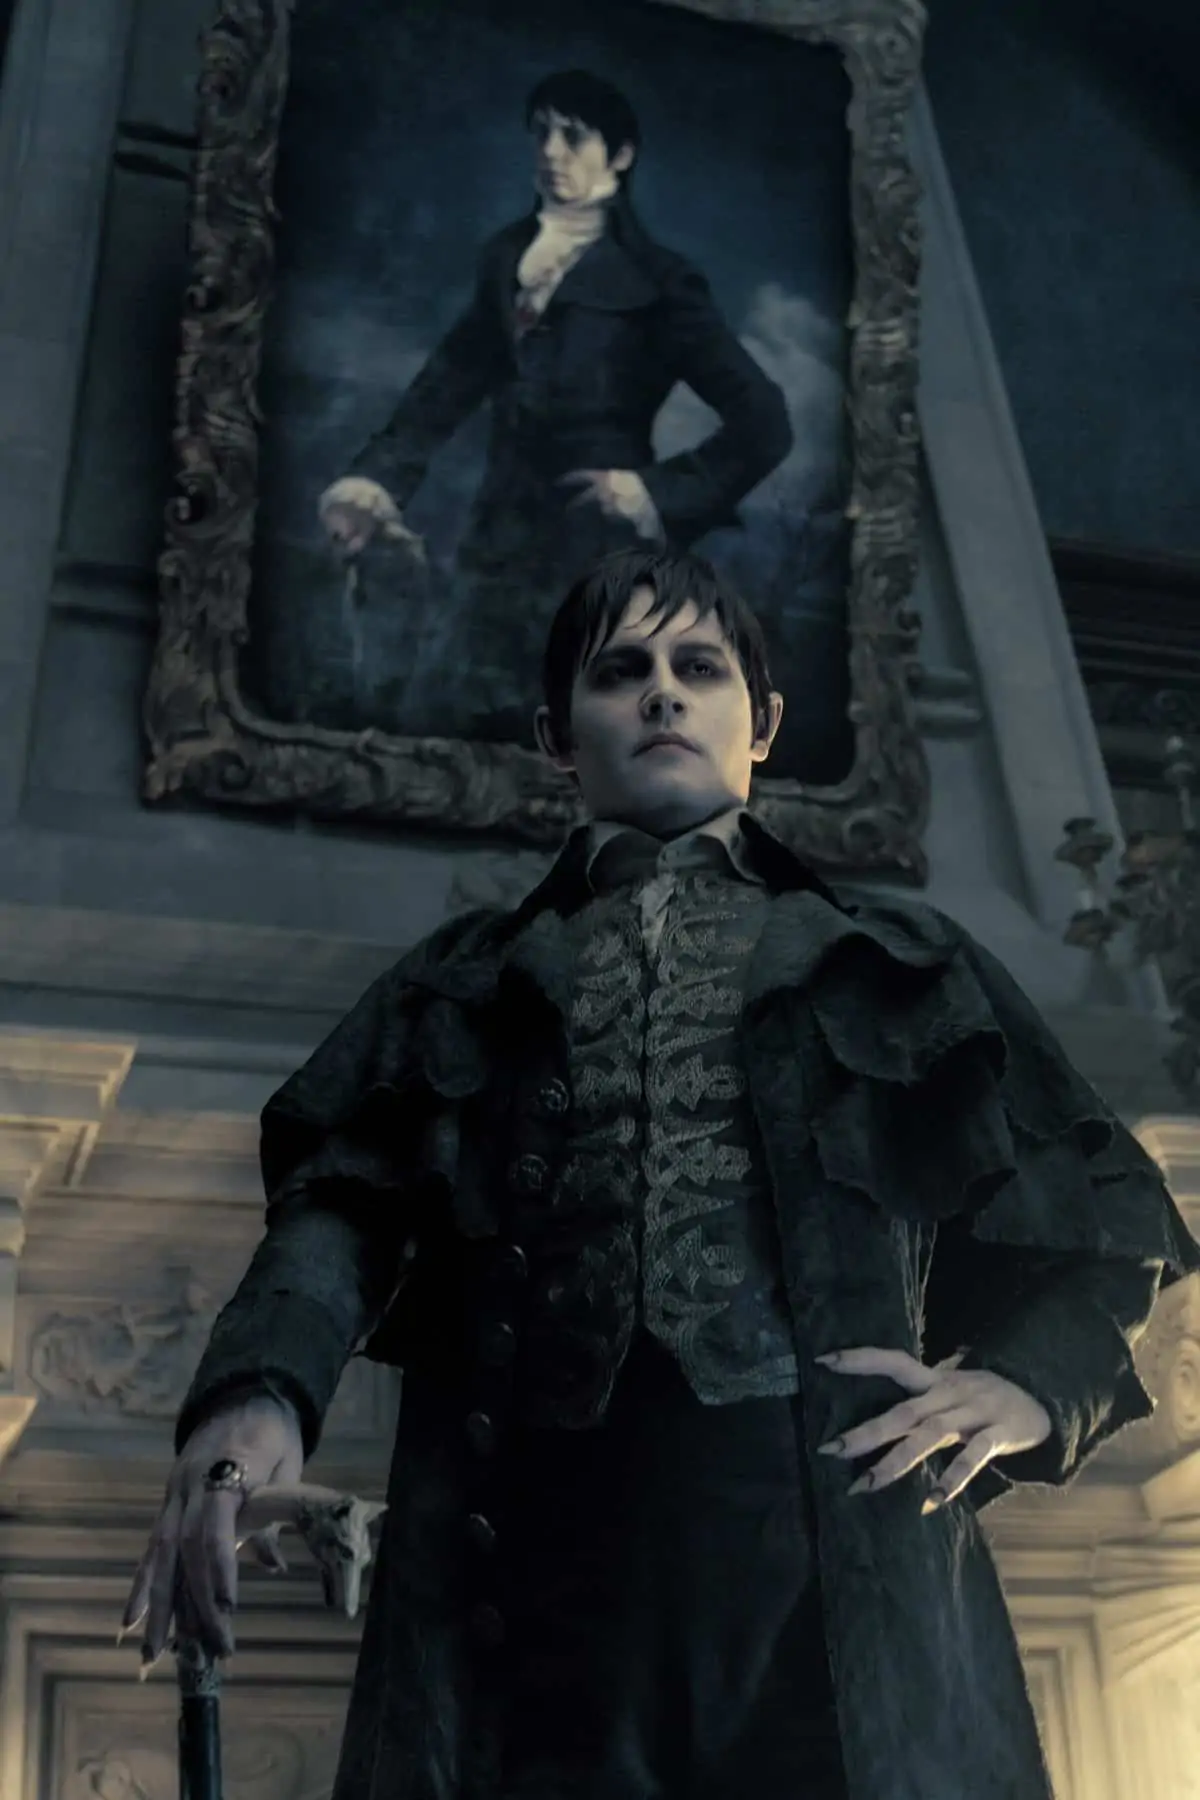 JOHNNY DEPP as Barnabas Collins in Warner Bros. PicturesÕ and Village Roadshow PicturesÕ gothic comedy ÒDARK SHADOWS,Ó a Warner Bros. Pictures release.
Photo by Peter Mountain